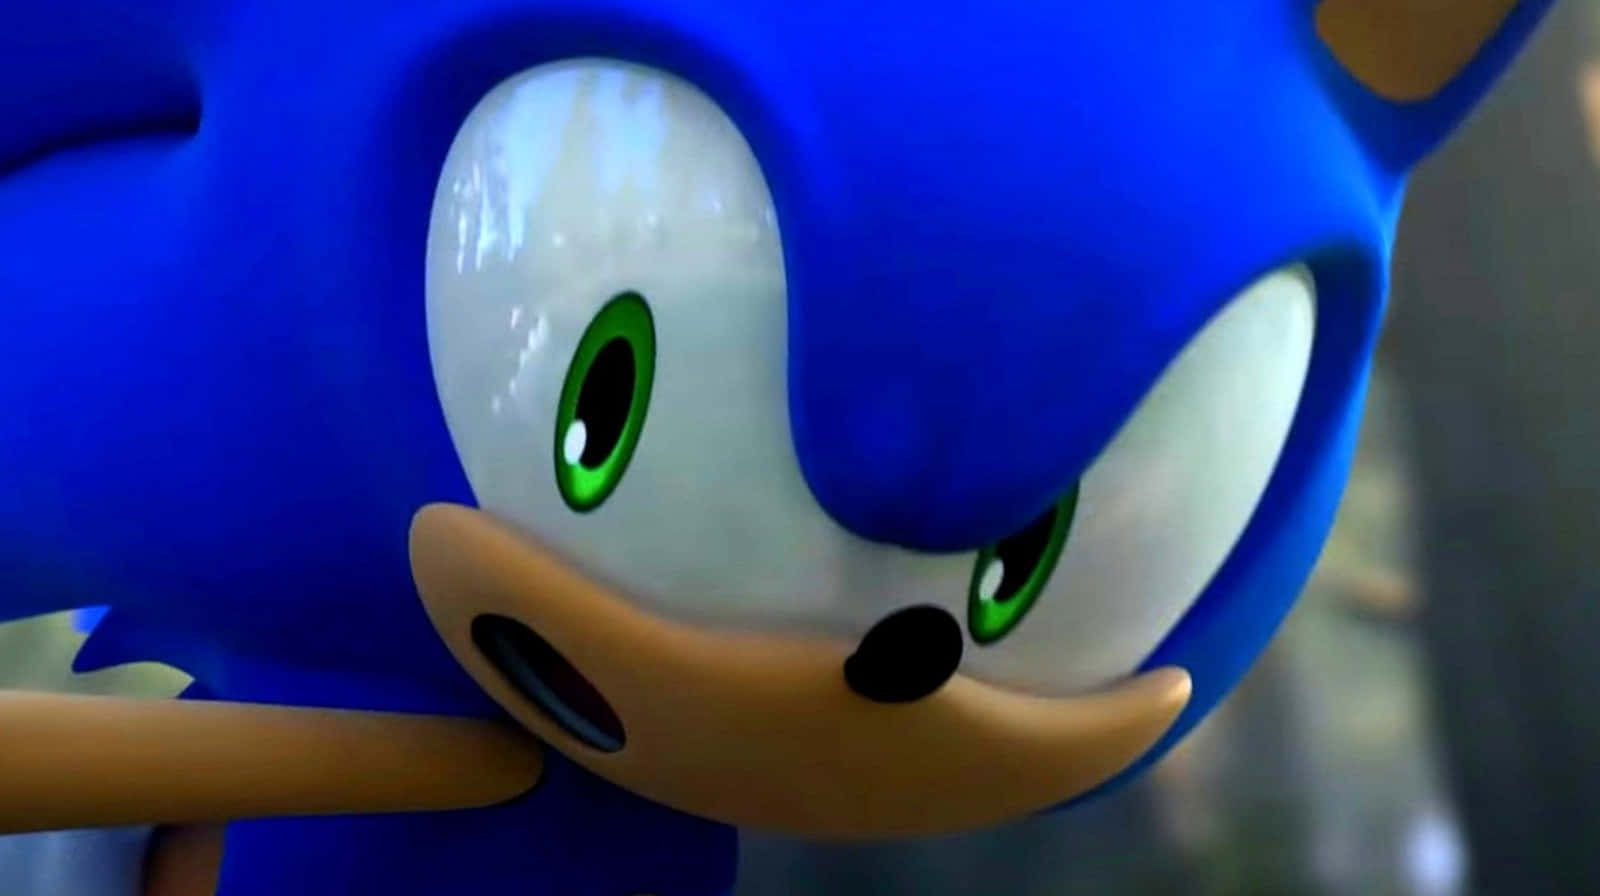 Sonic the Hedgehog - The fastest and coolest Hedgehog on the planet